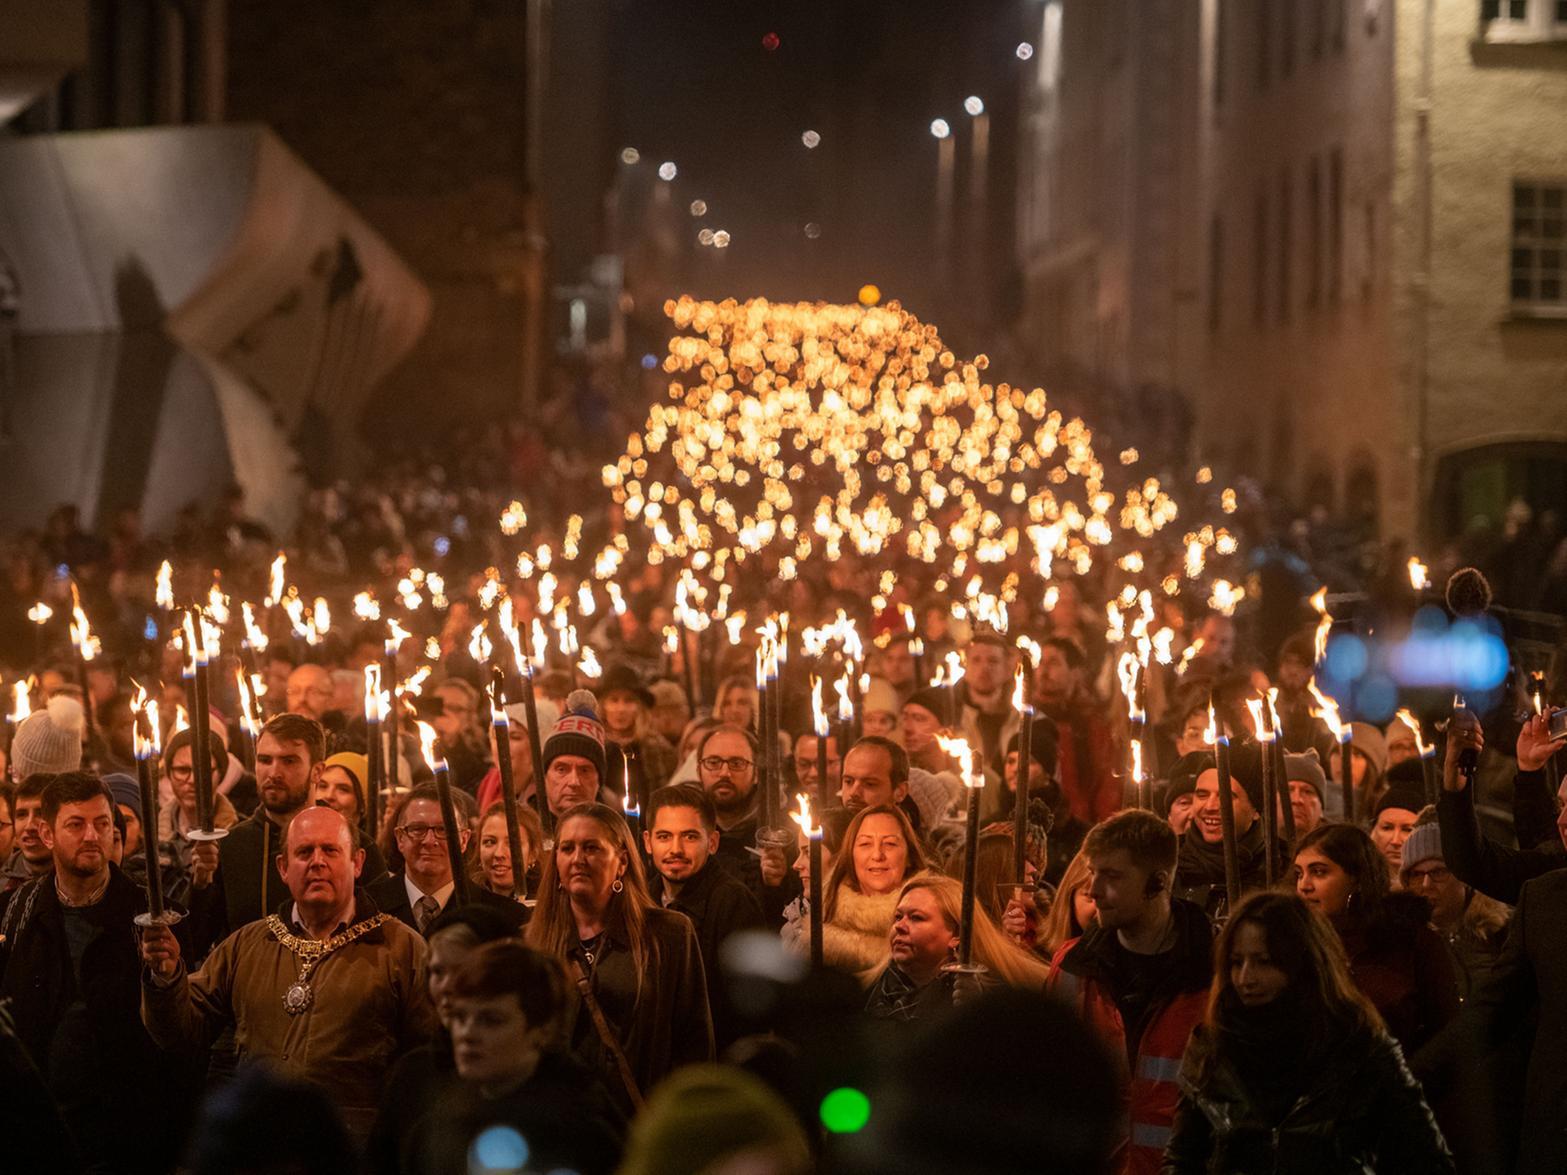 It is thought around 20,000 people took part in the torchlight procession, with another 20,000 estimated to be watching from vantage points in the Old Town . Pic: Ian Georgeson